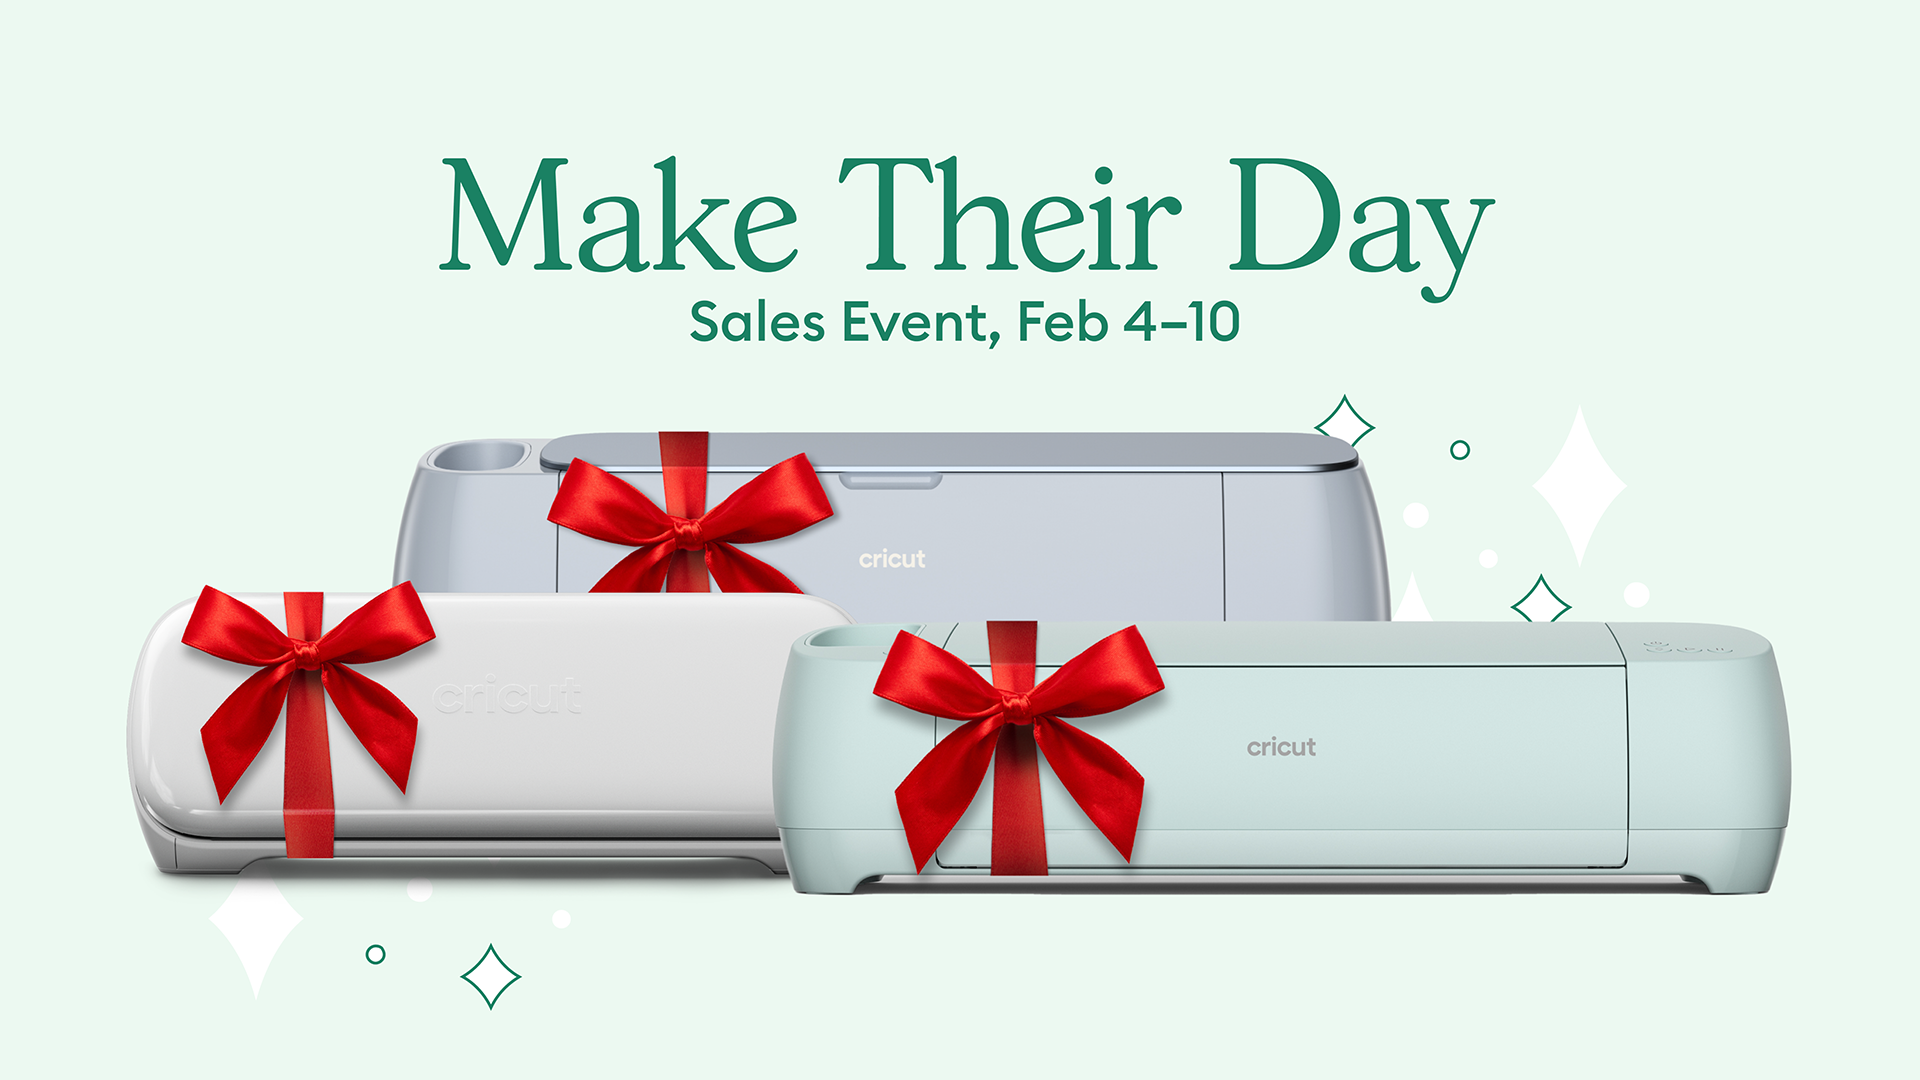 Last-minute deals at the Cricut Annual Make Their Day Sales Event